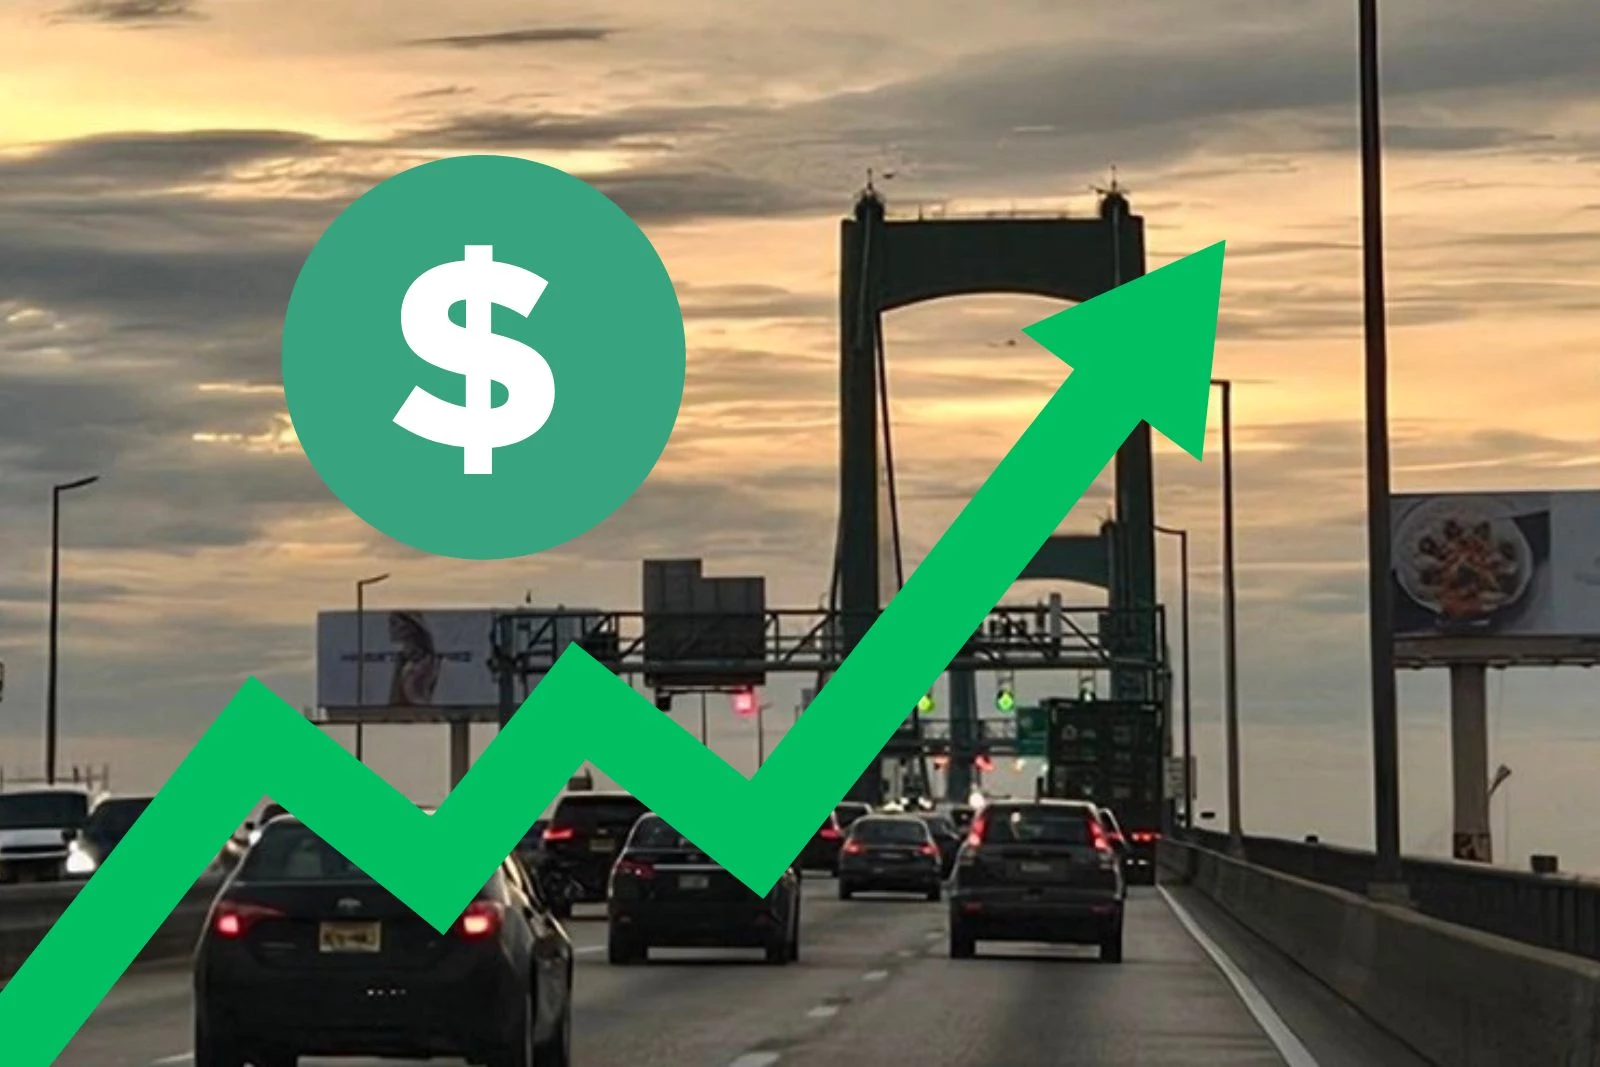 New Jersey commuters bracing for another toll hike